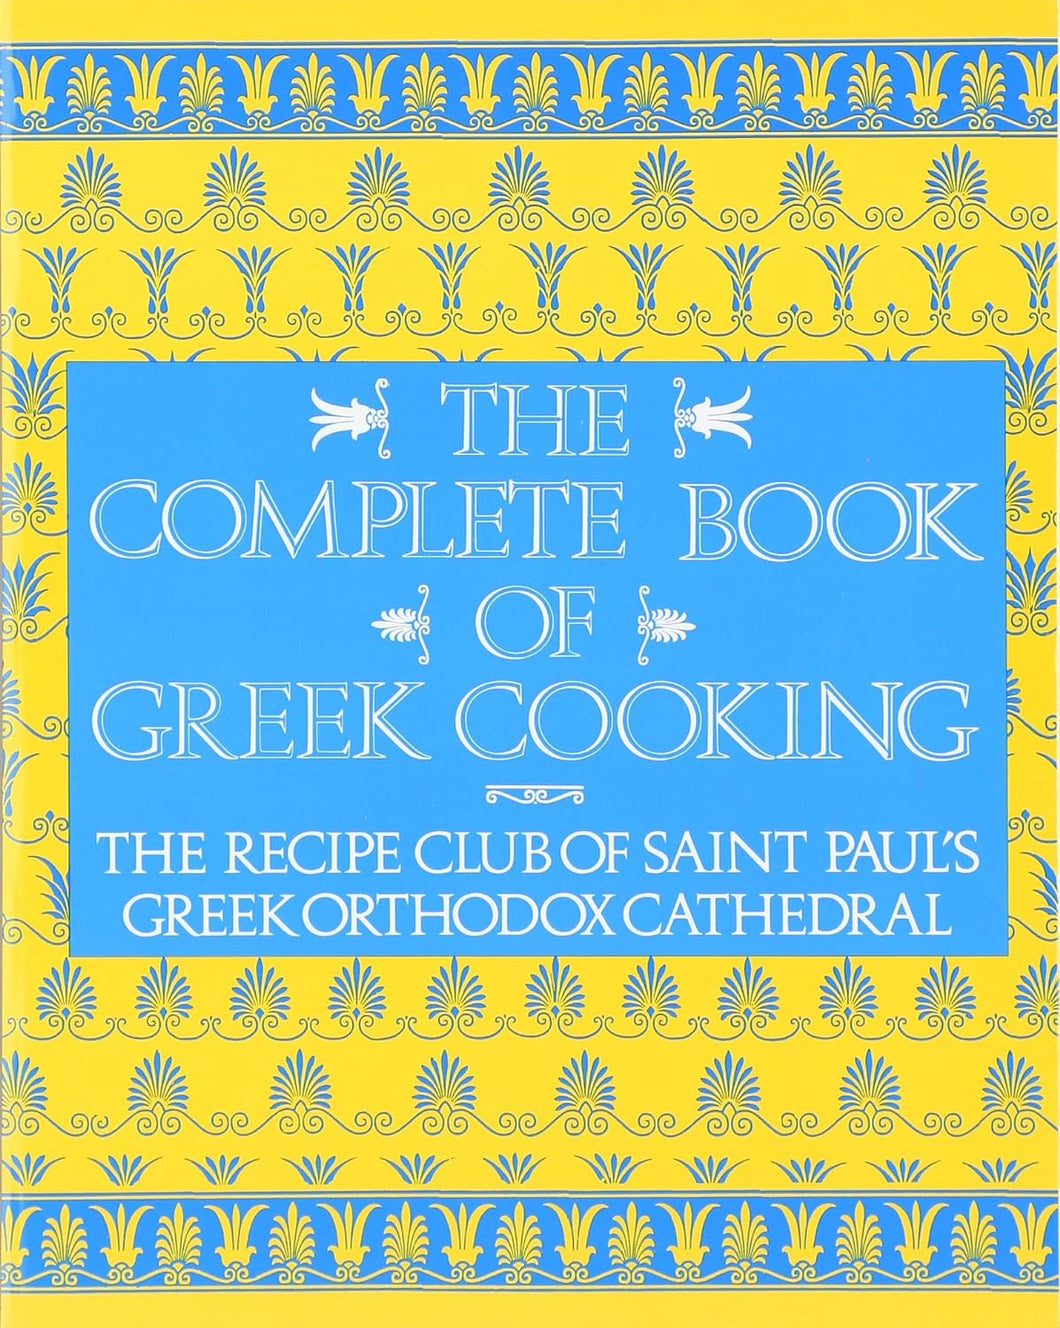 The Complete Book of Greek Cooking by The Recipe Club of Saint Paul's Greek Orthodox Cathedral